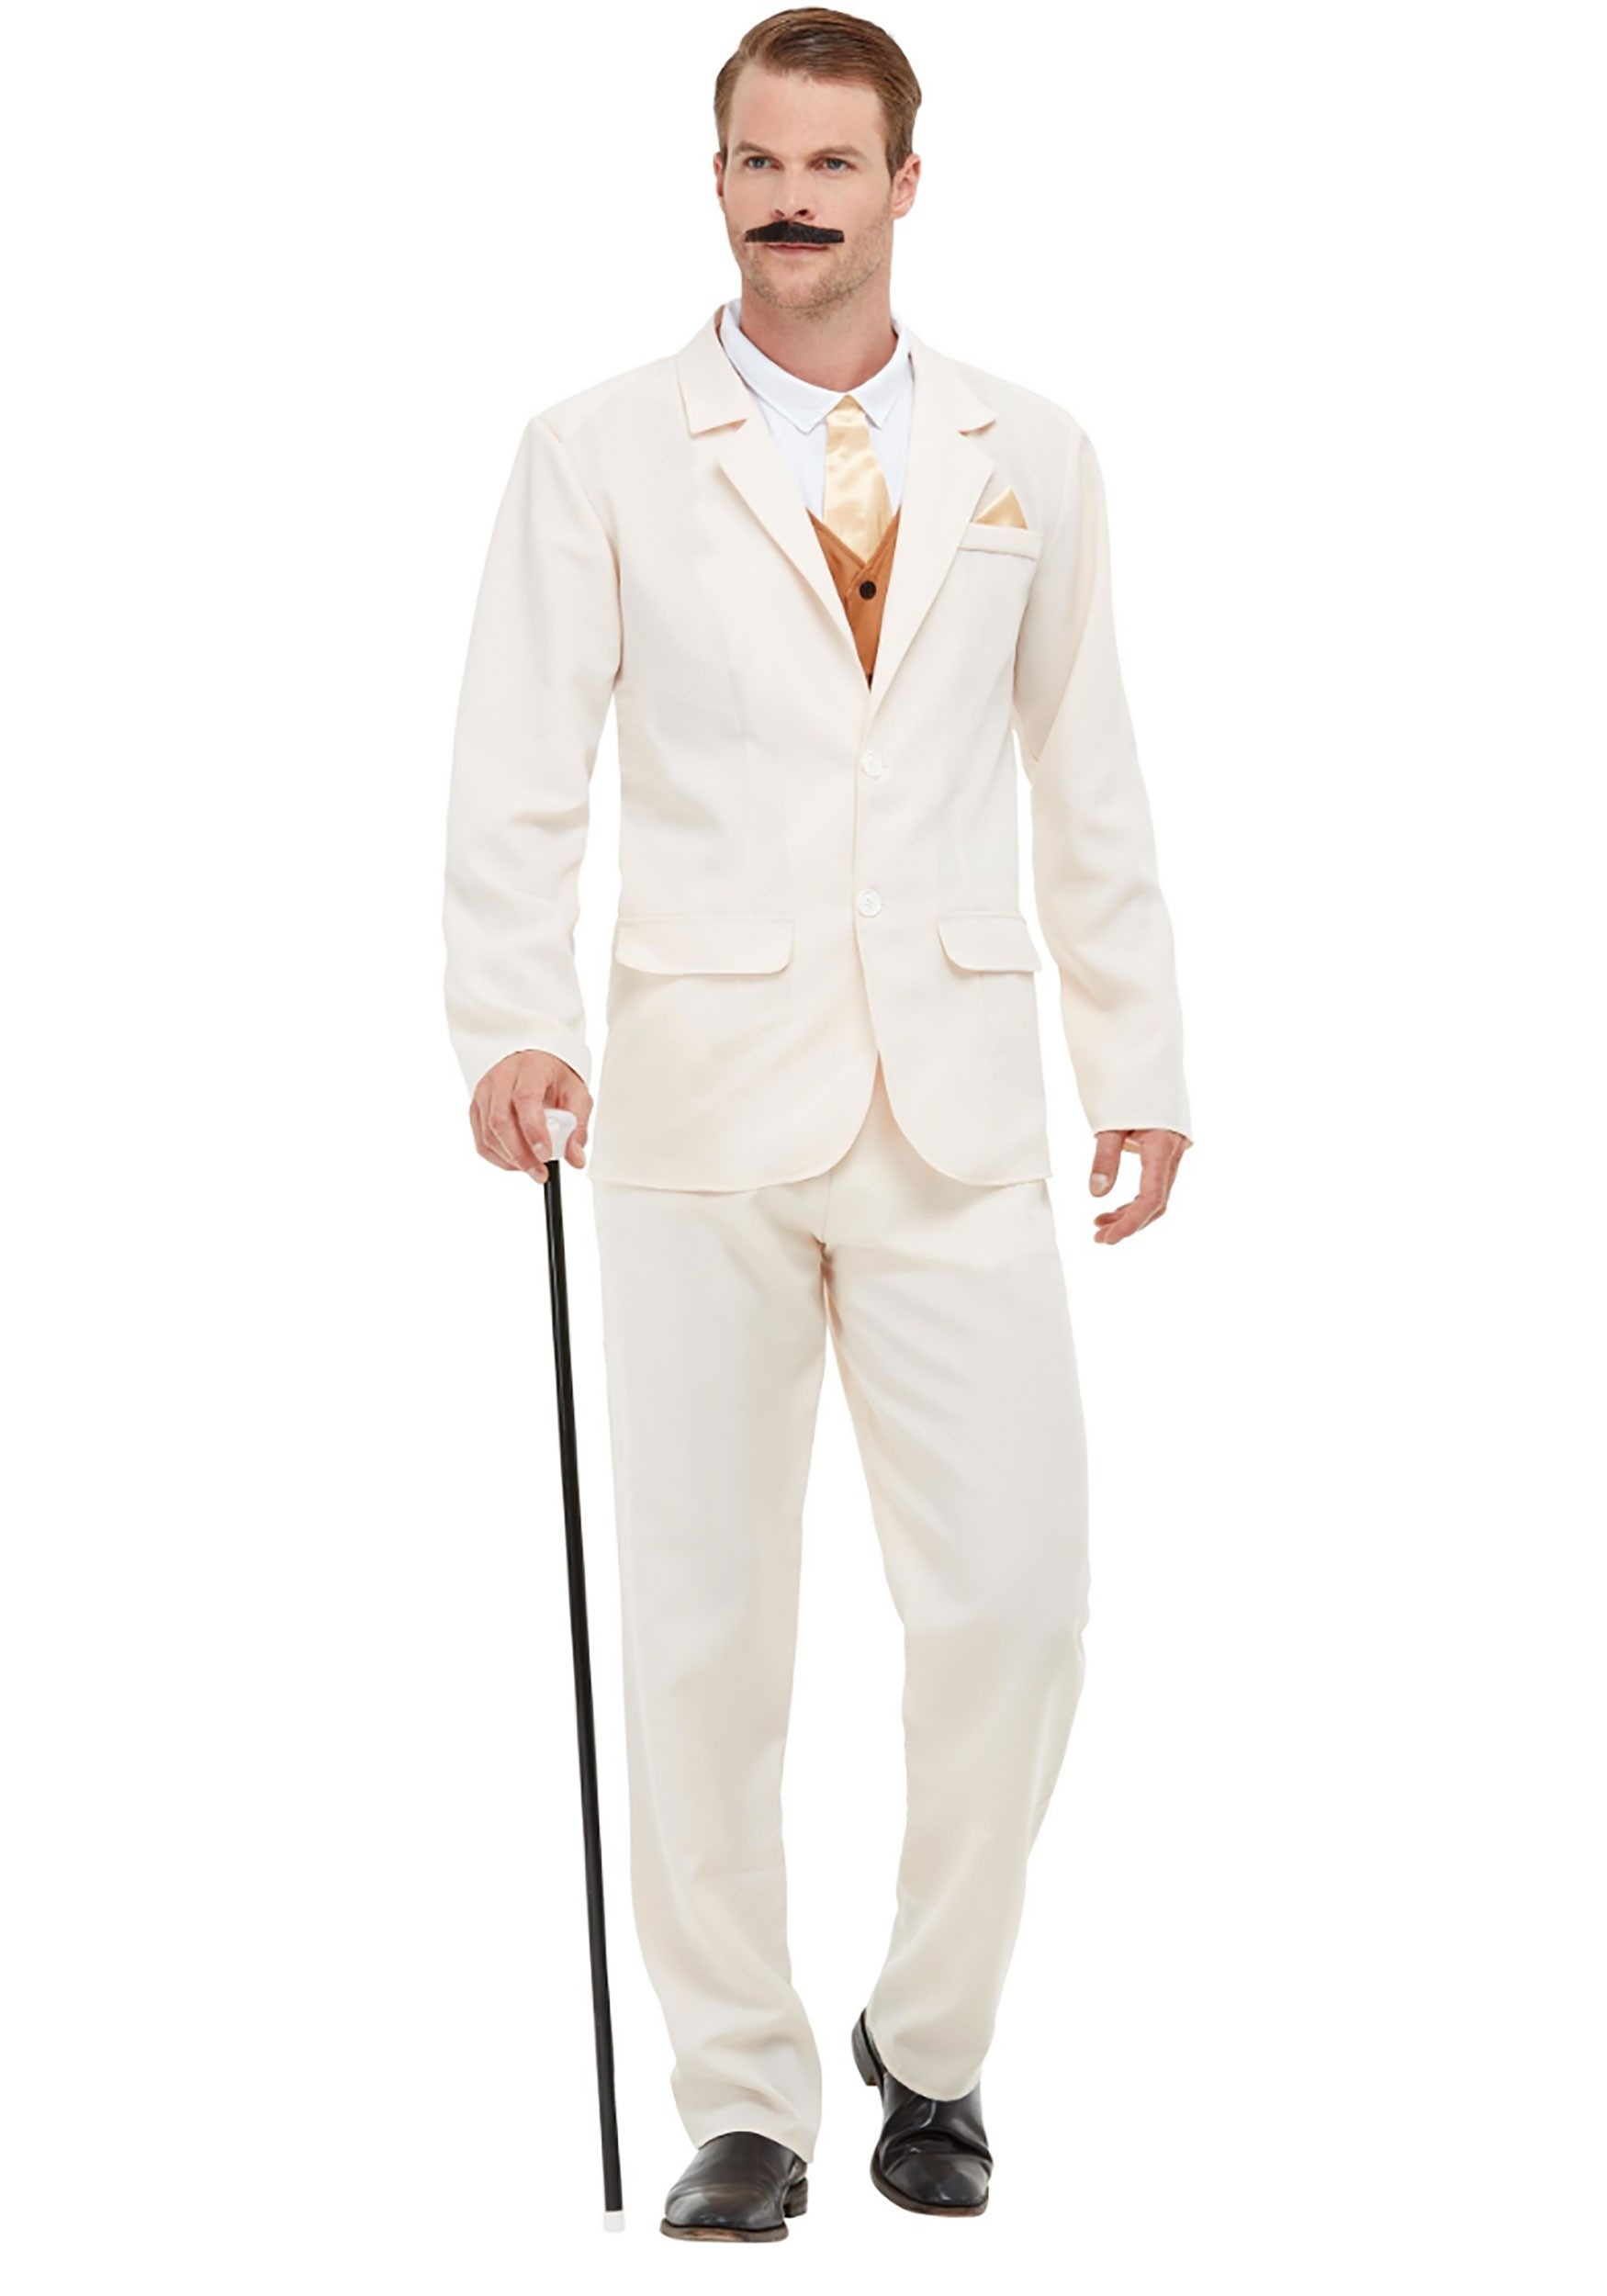 Roaring 20s White Costume for Adults